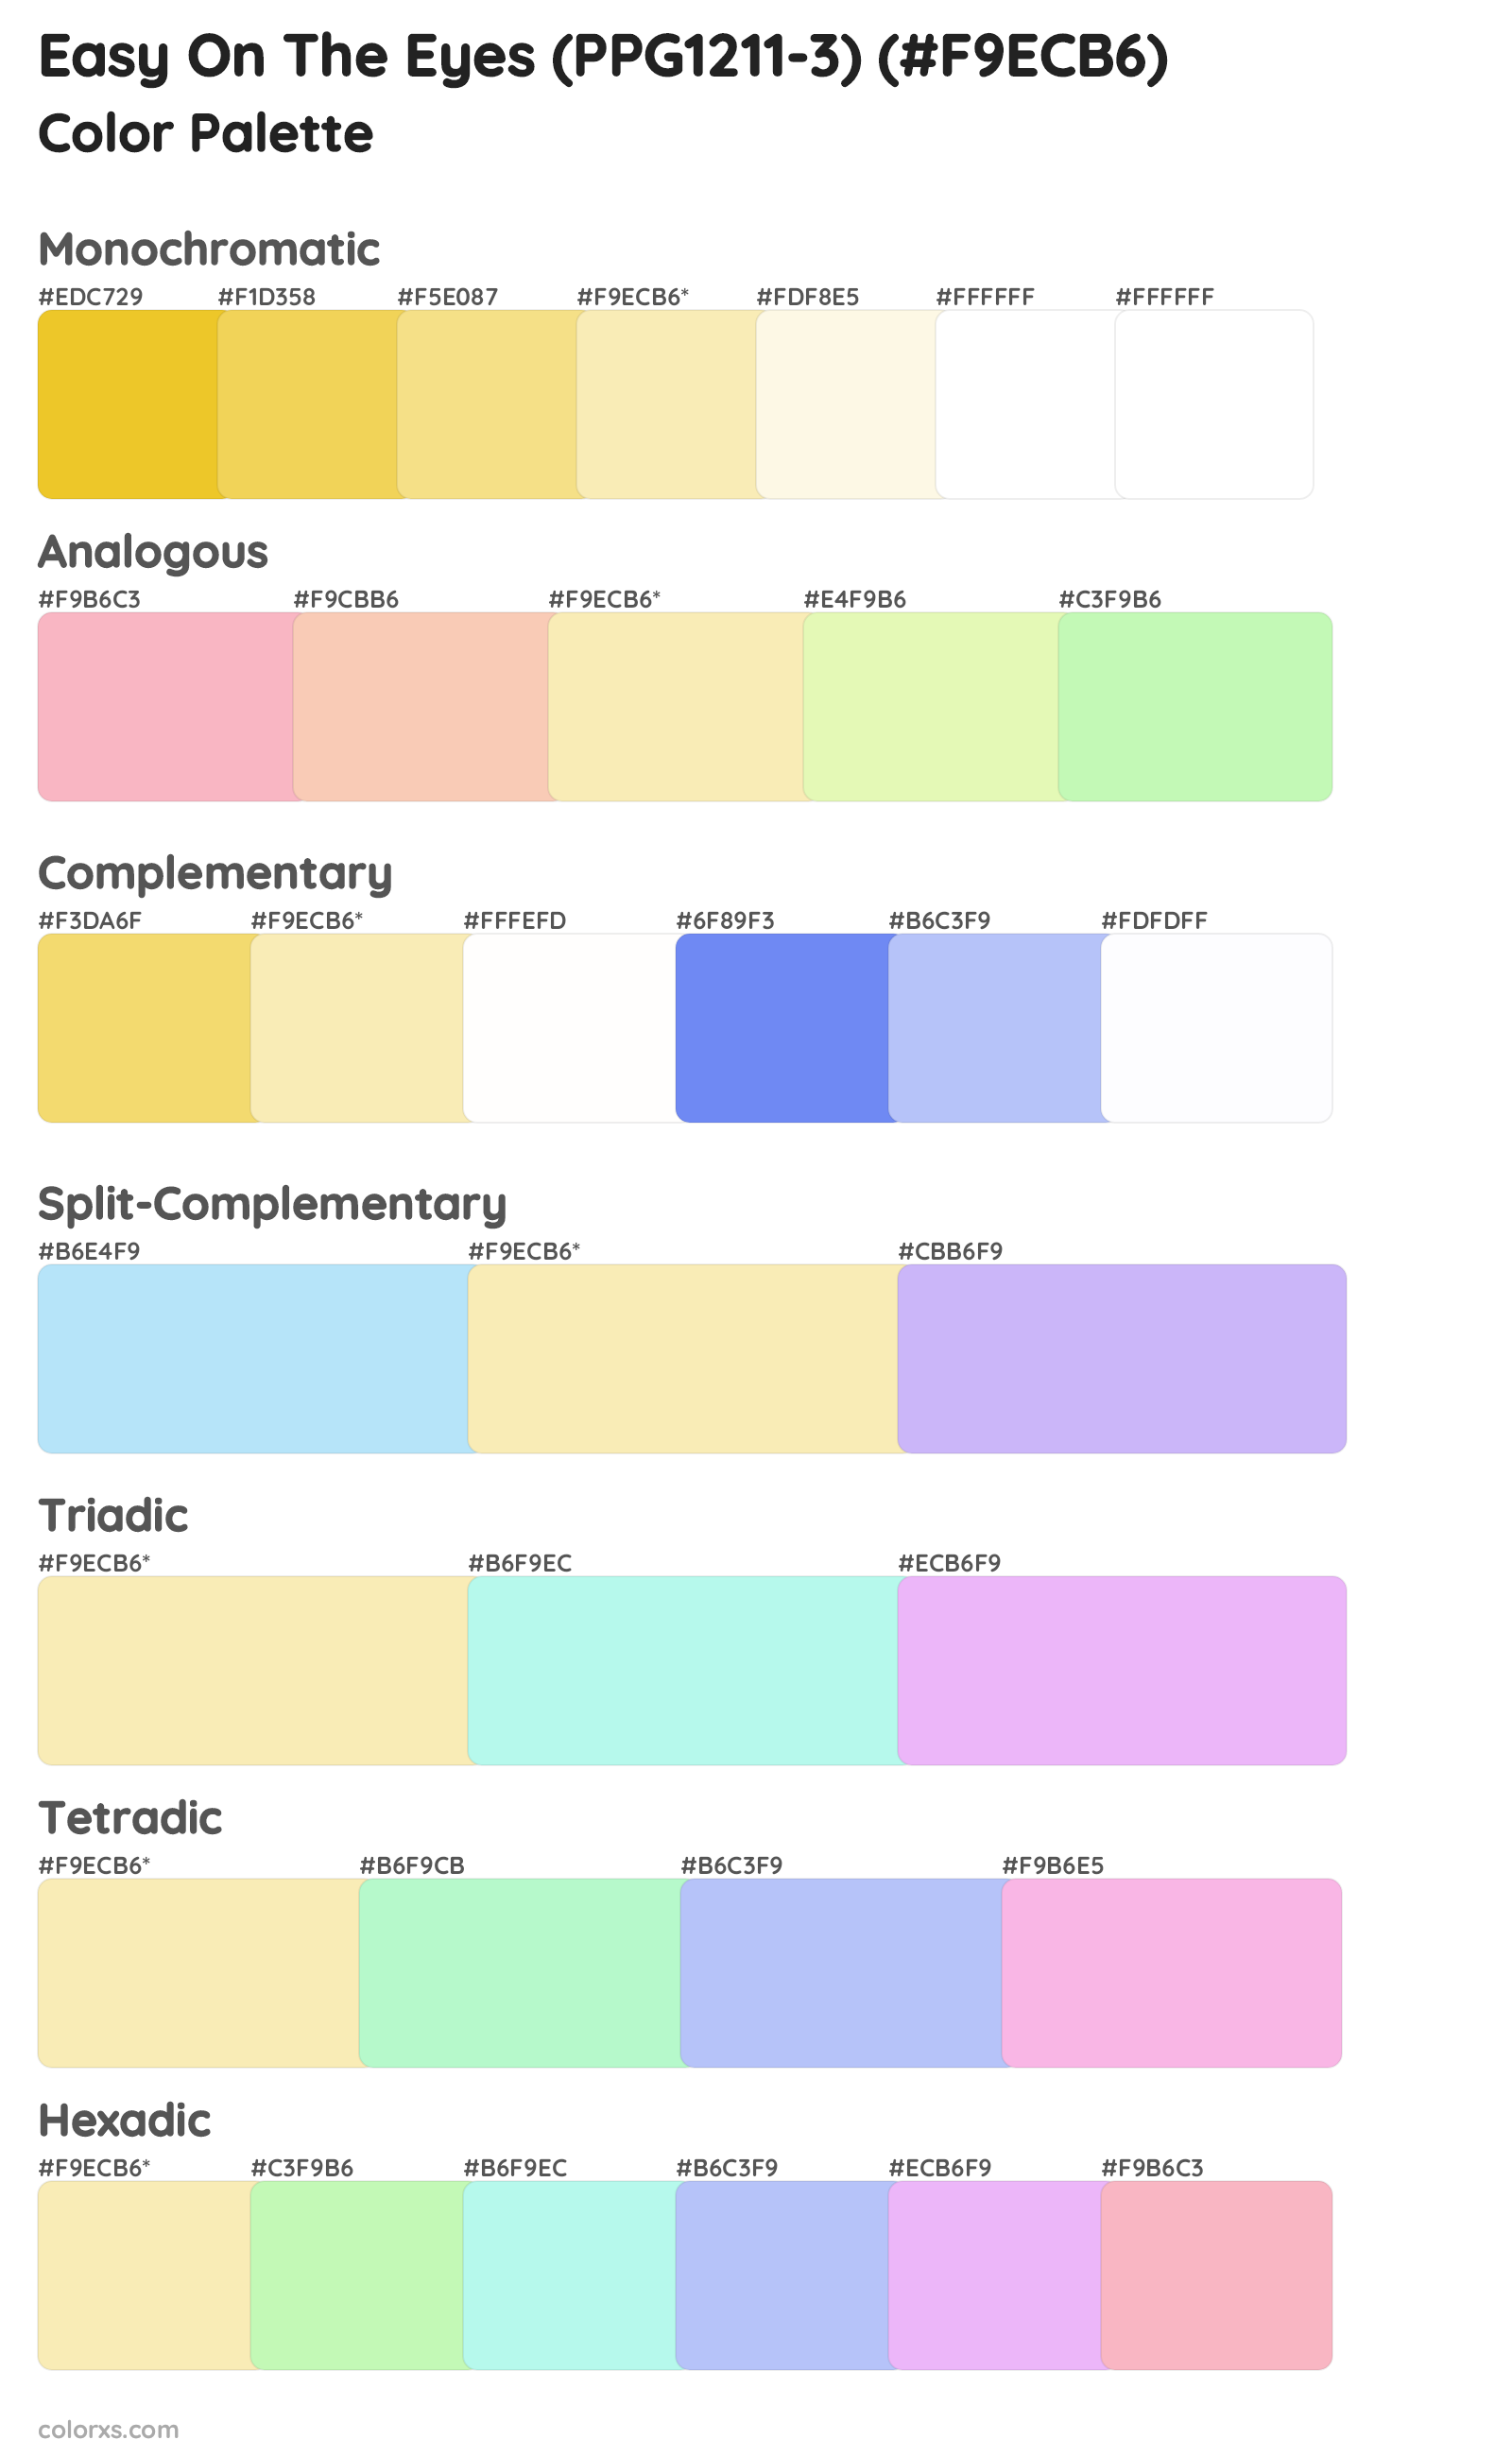 Easy On The Eyes (PPG1211-3) Color Scheme Palettes